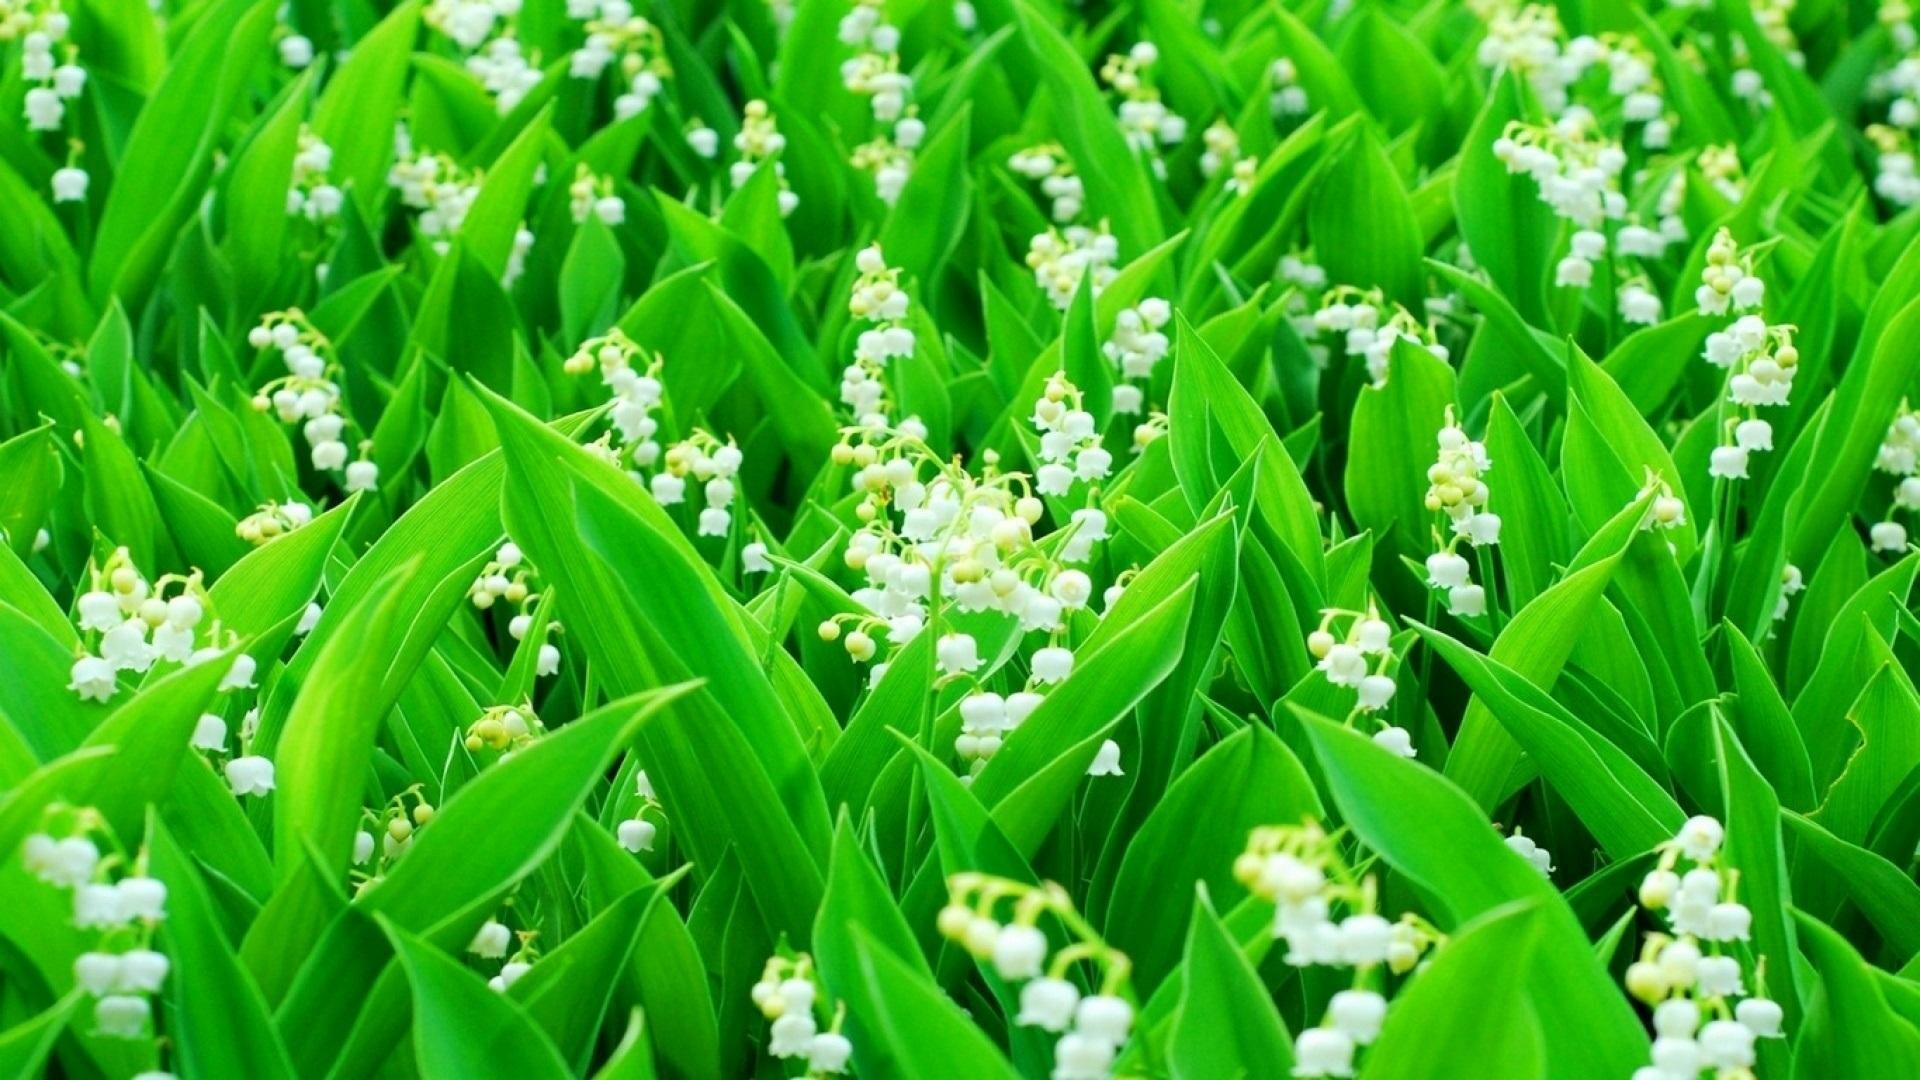 Lily of the Valley: Convallaria, Rhizomatous perennials with elliptic to narrowly ovate leaves and arching racemes of small, highly fragrant, bell-shaped flowers followed by red berries. 1920x1080 Full HD Background.